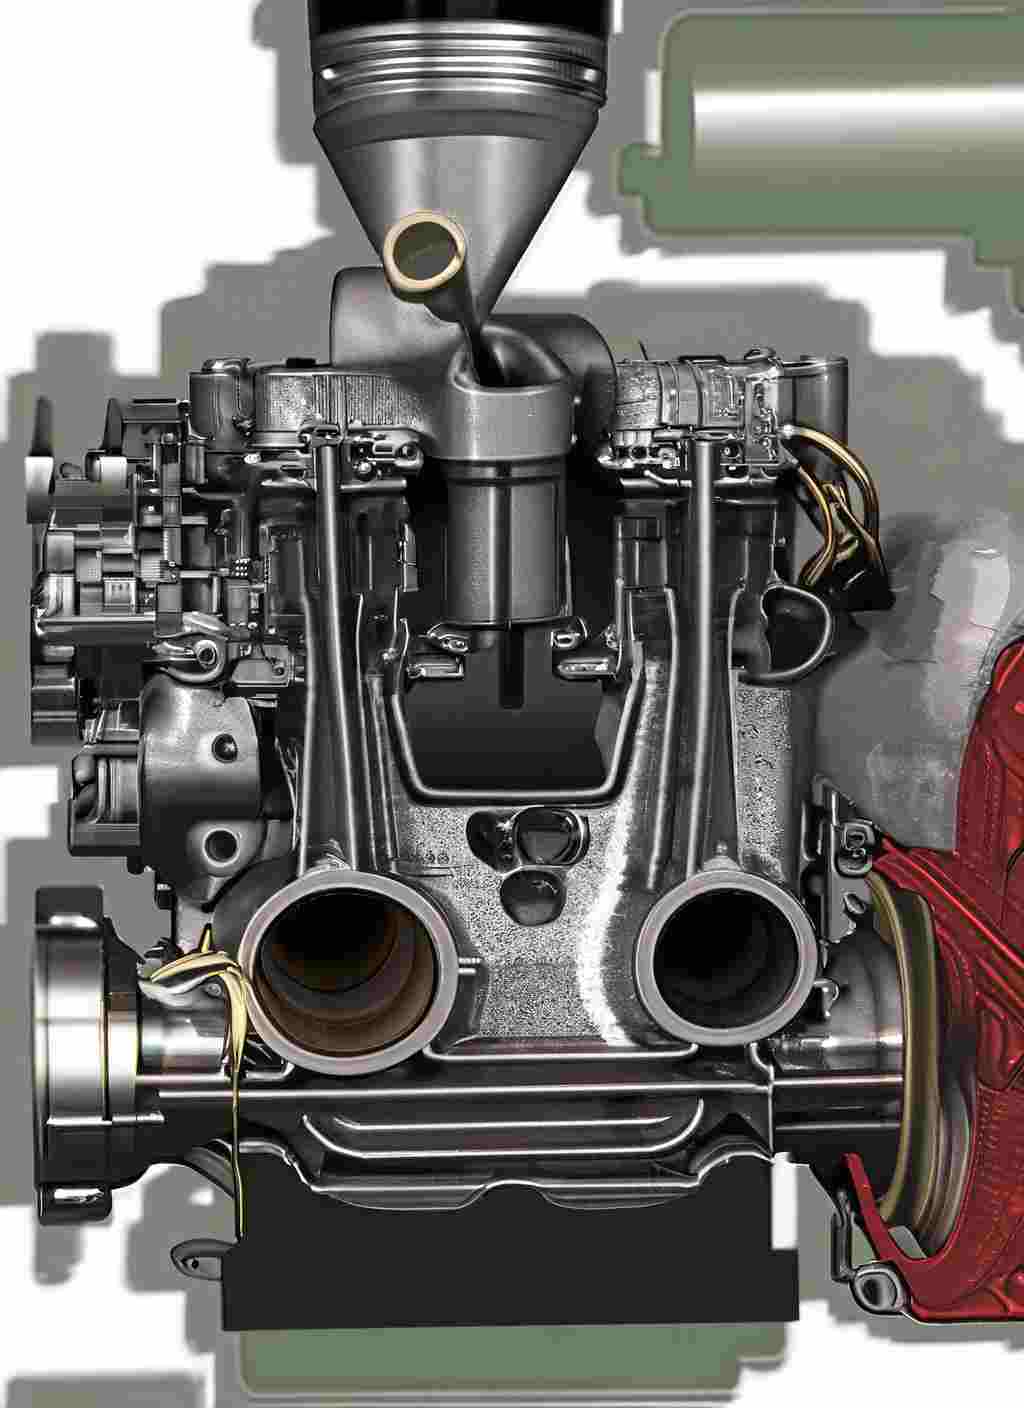 Components of Internal combution engine